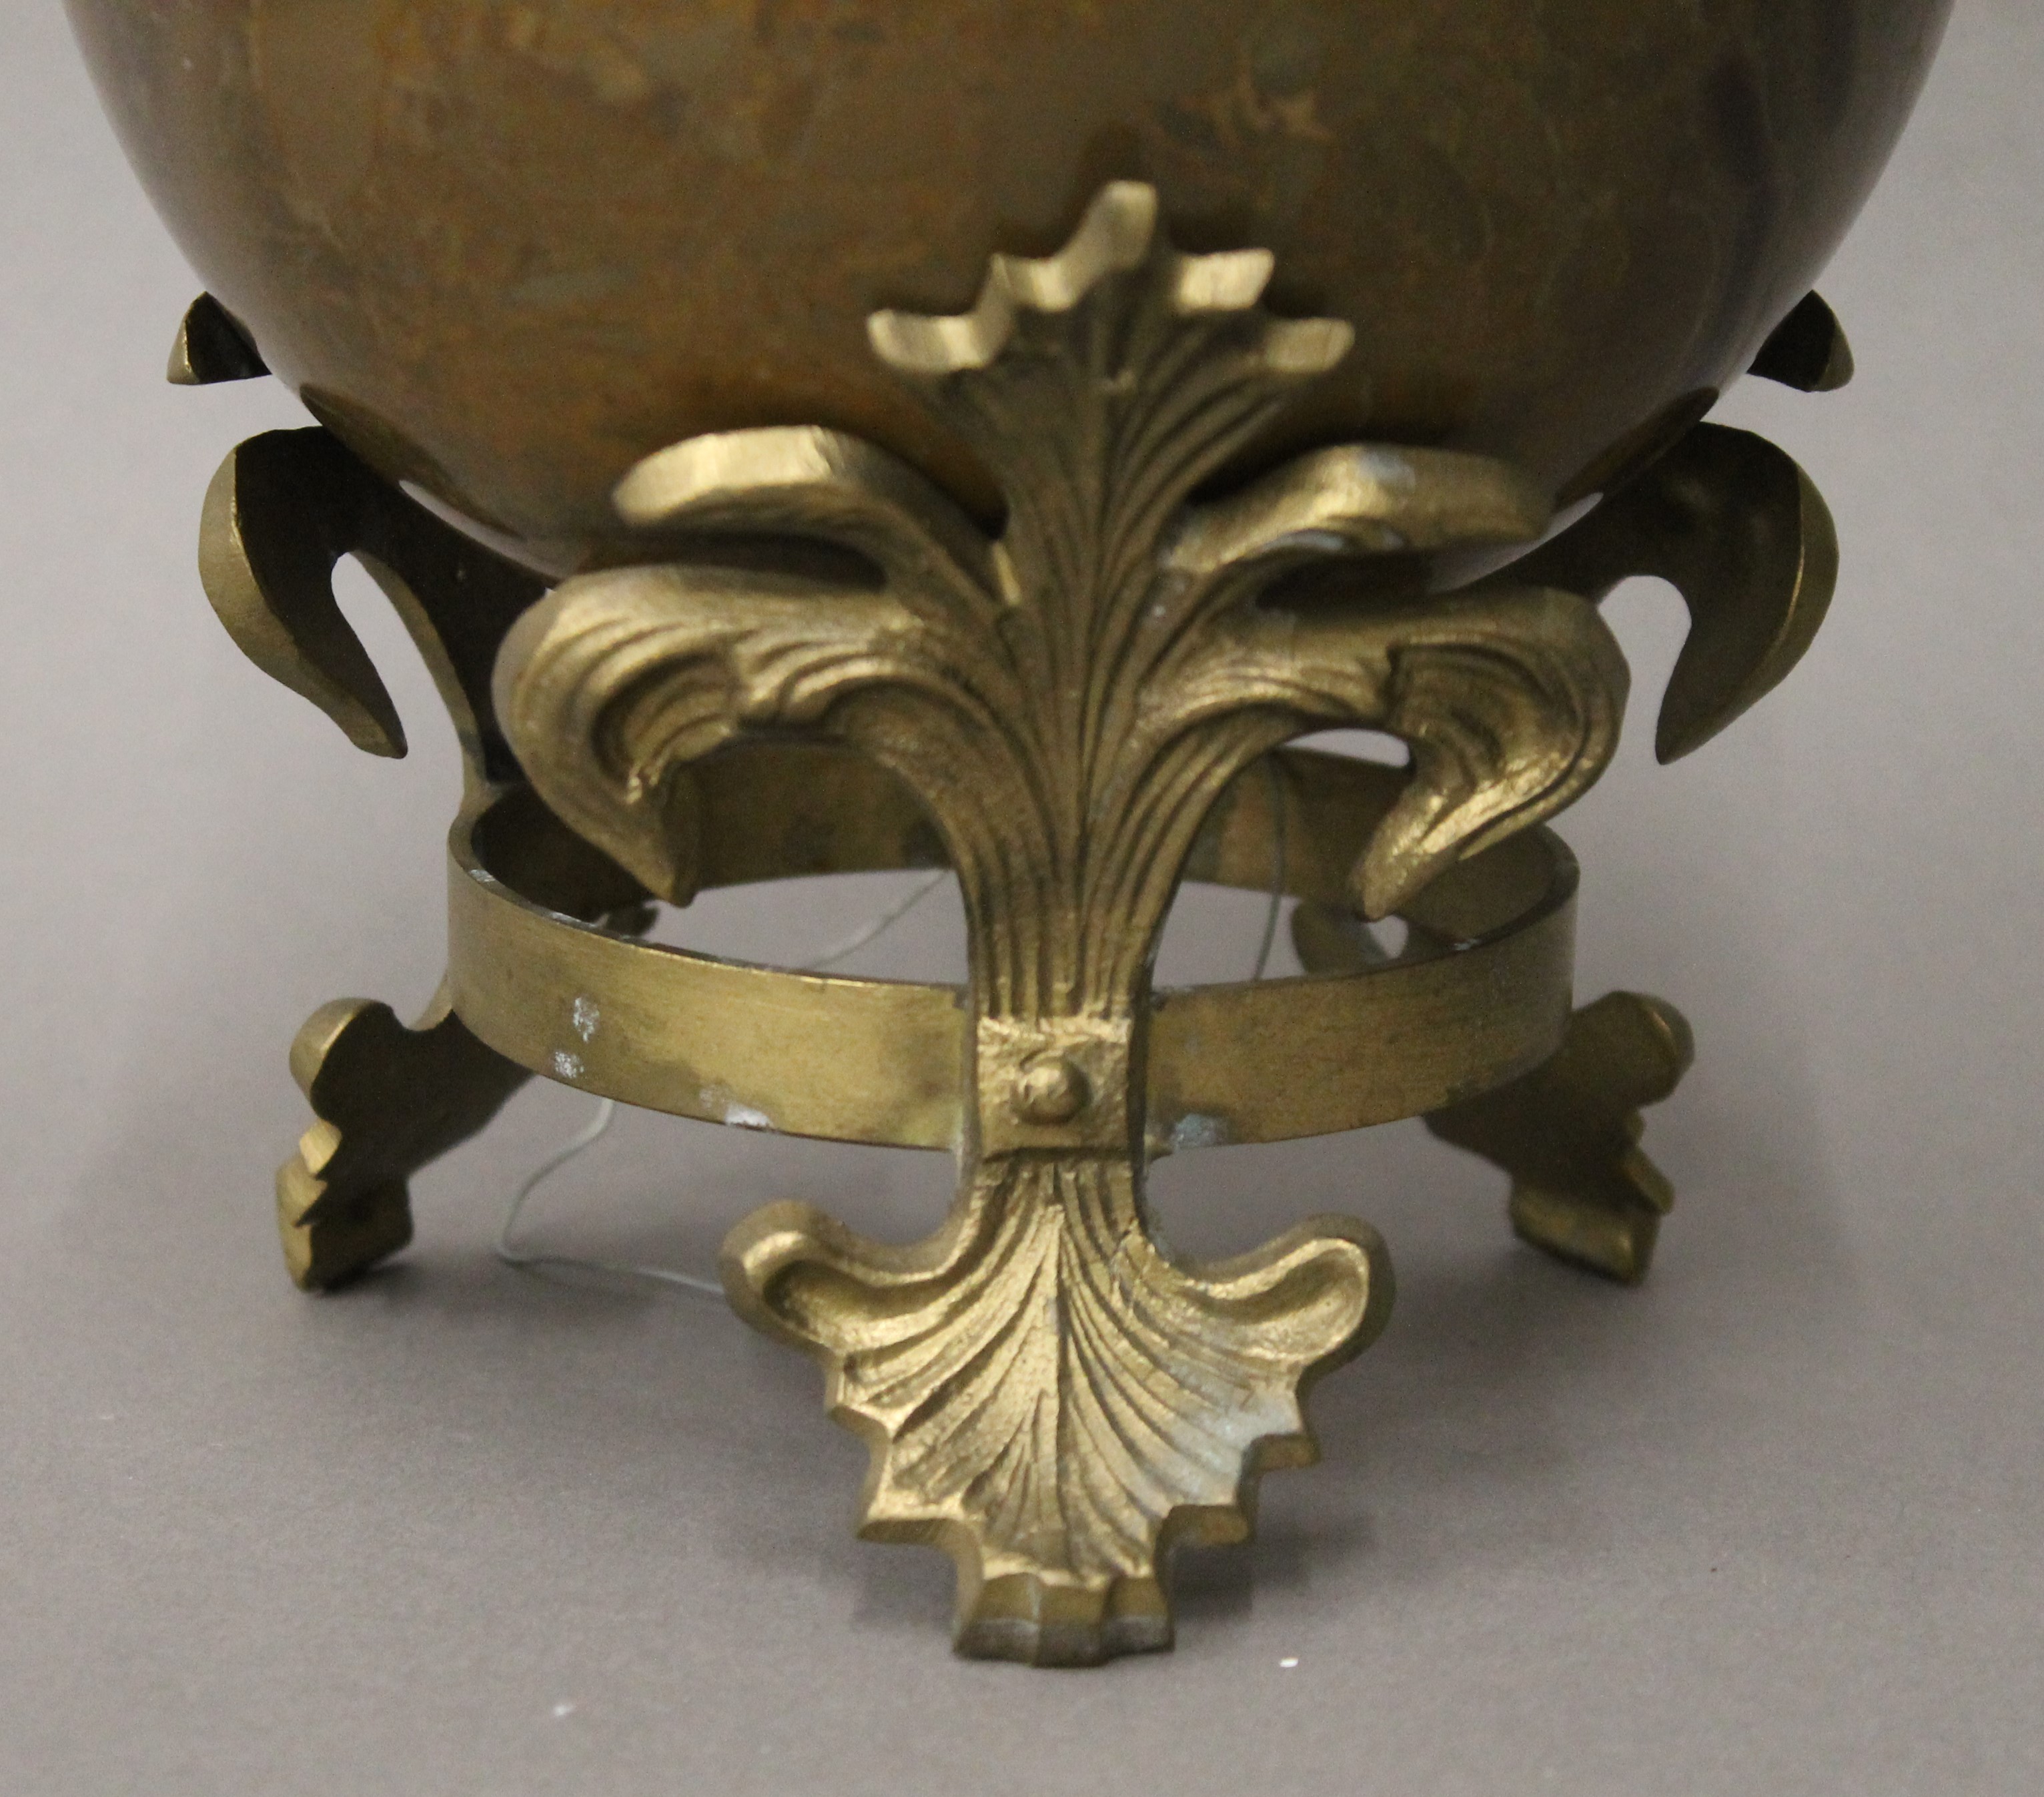 A large marble ball on a brass stand. 20 cm high overall. - Image 2 of 4